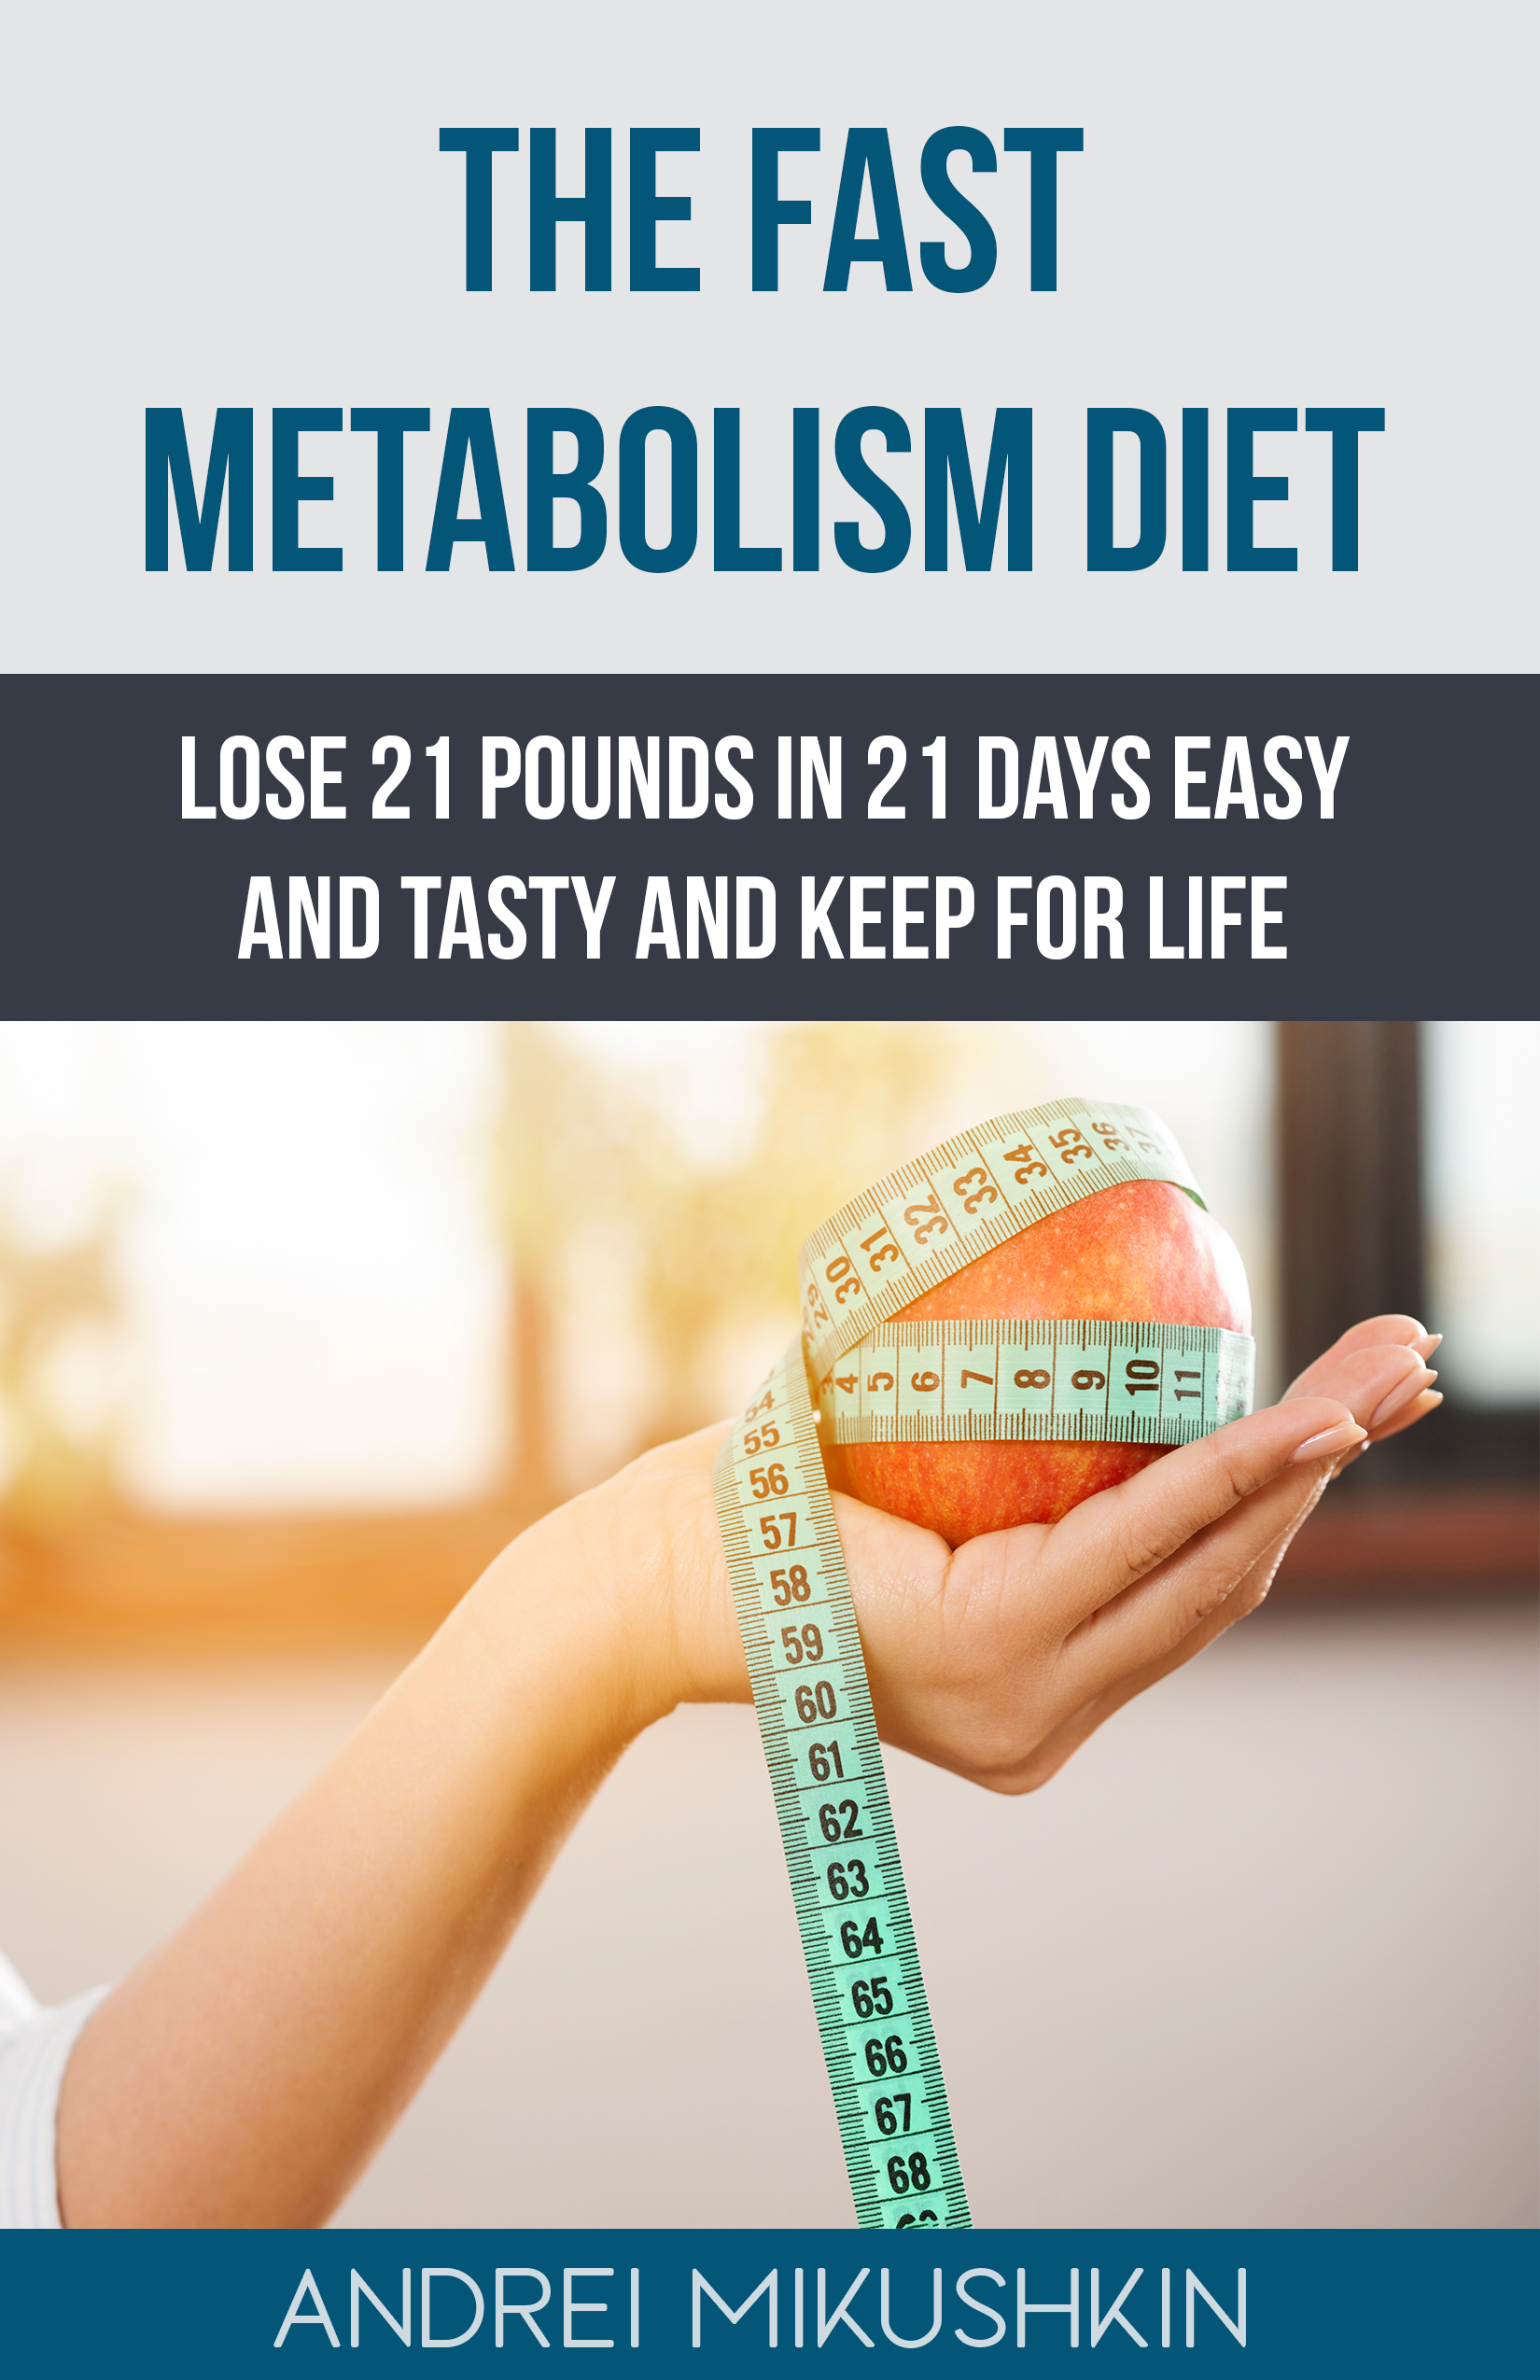 FREE: The Fast Metabolism Diet: Lose 21 Pounds in 21 Days Easy and Tasty and Keep for Life by Andrei Mikushkin